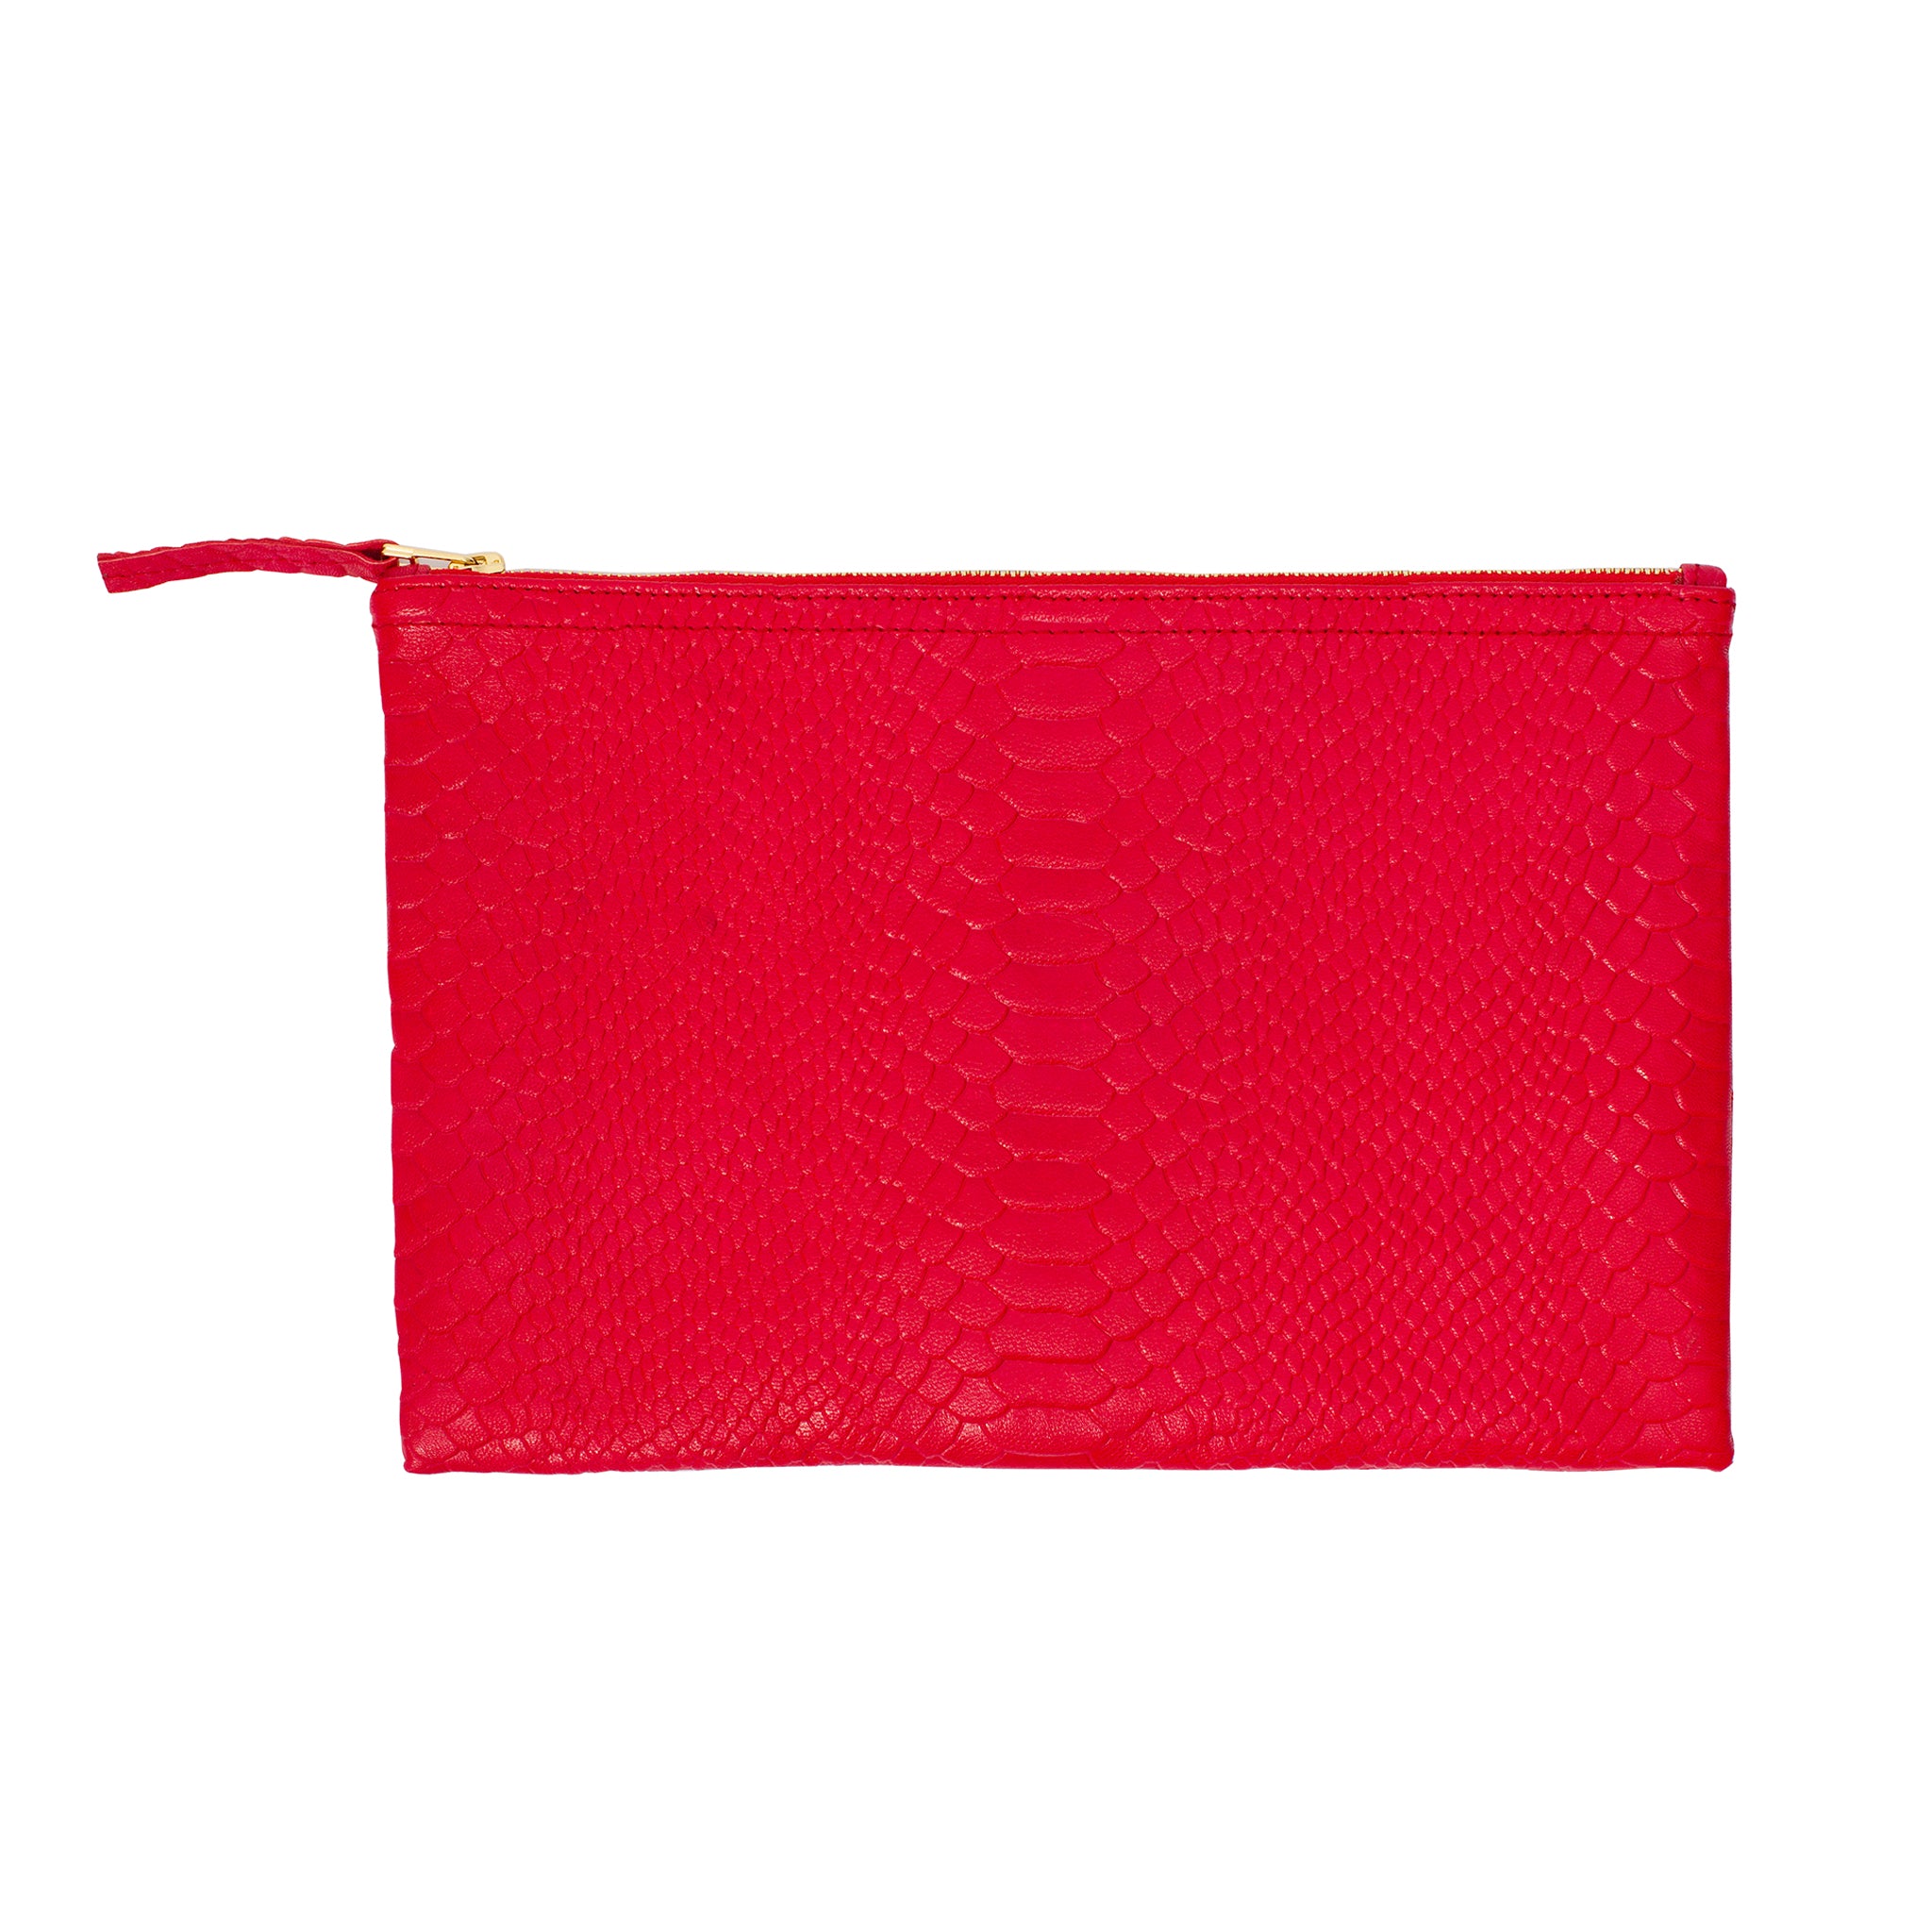 Red Flat Wallet Clutch Genuine Leather Python Embossed 